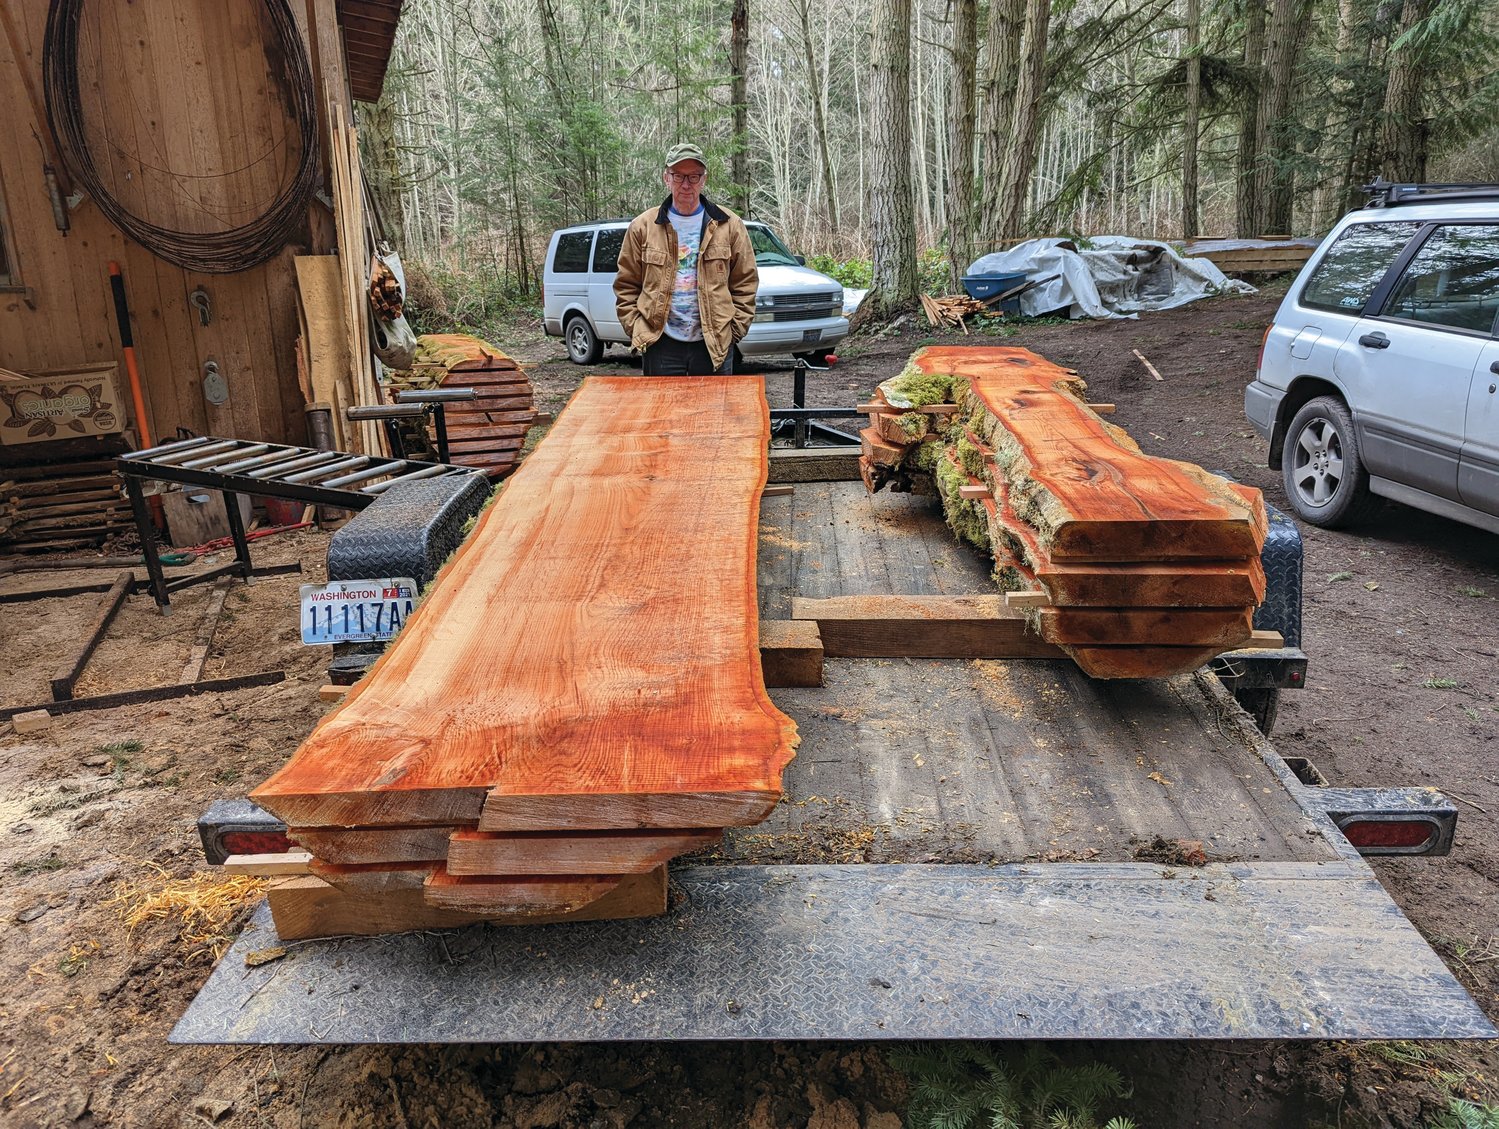 This year’s Woodworkers Show will feature wooden creations from a Western maple and red alder tree, felled at the Jefferson Land Trust’s Valley View Forest in Chimacum.